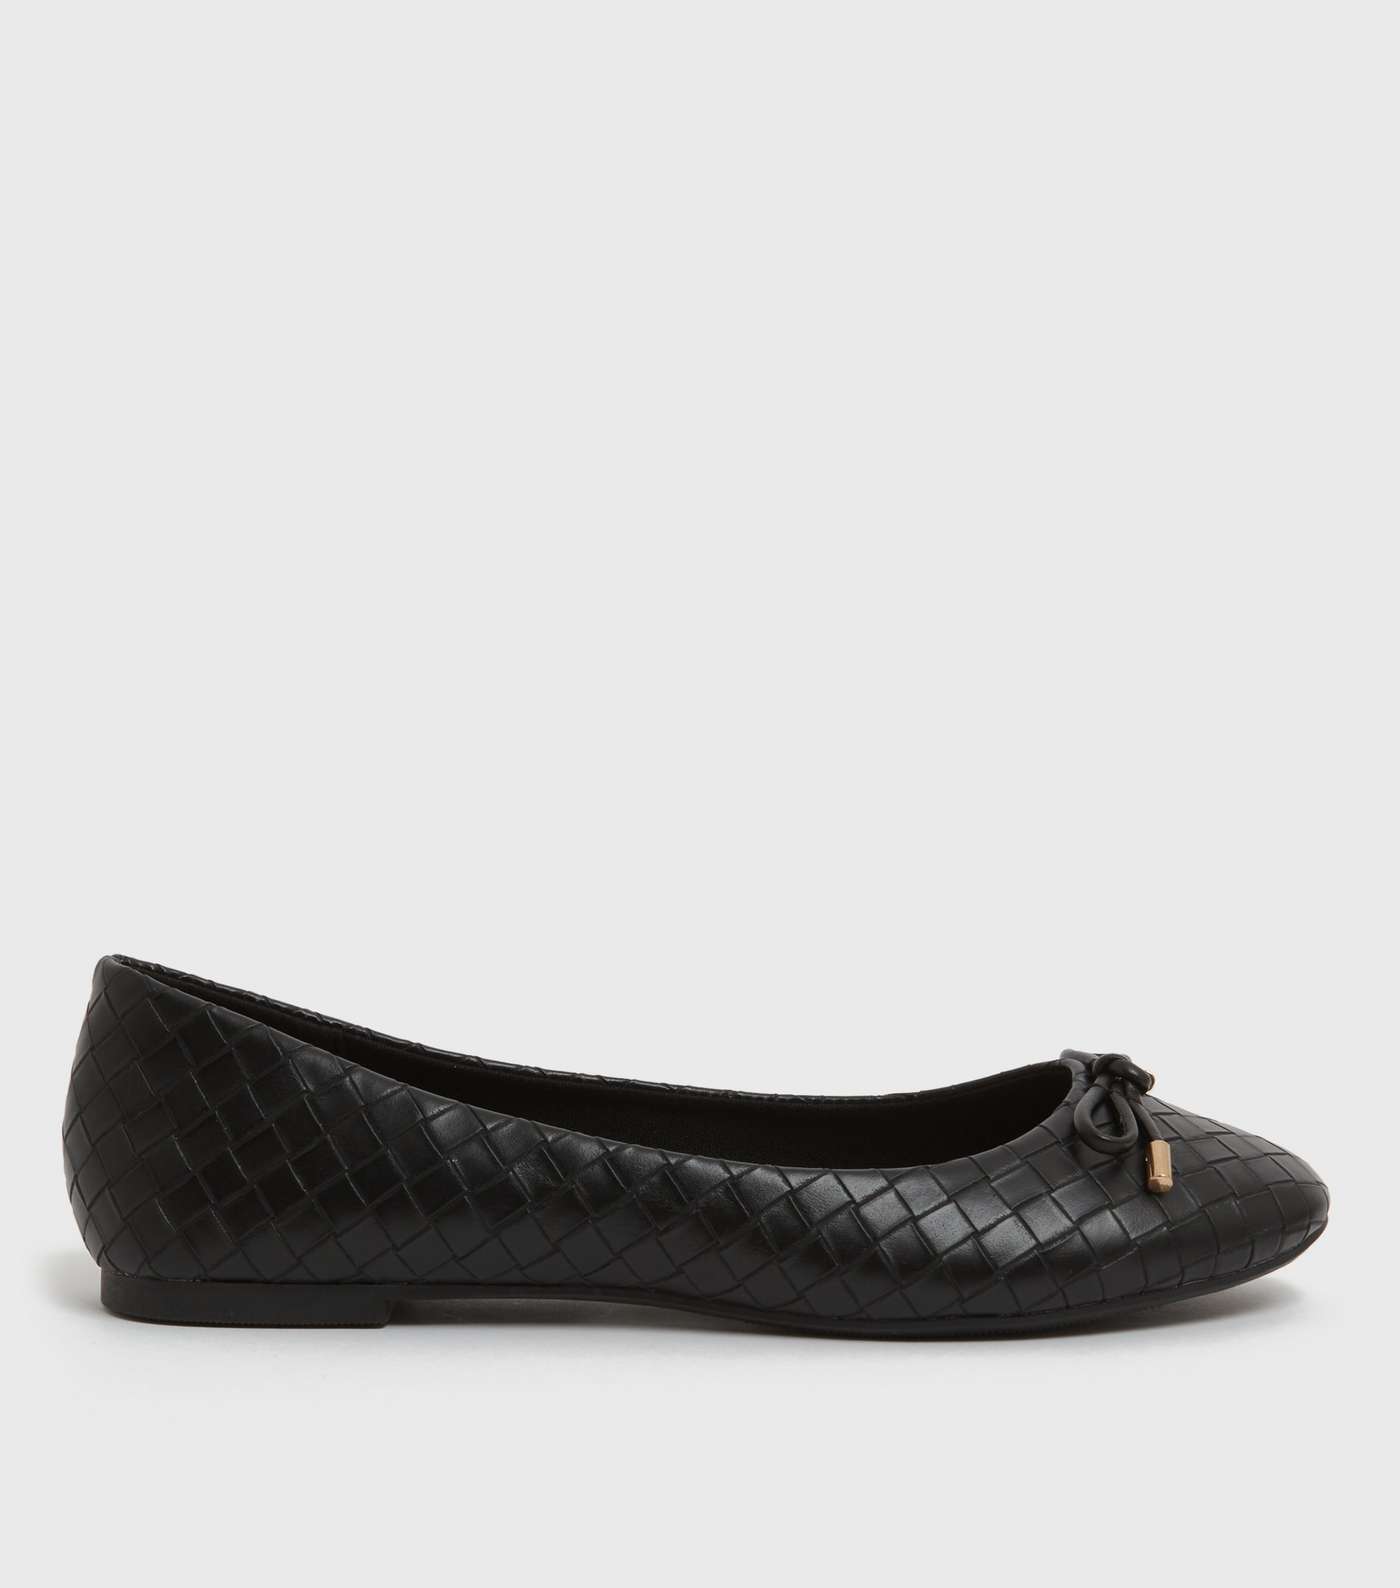 Black Woven Leather-Look Bow Ballet Pumps